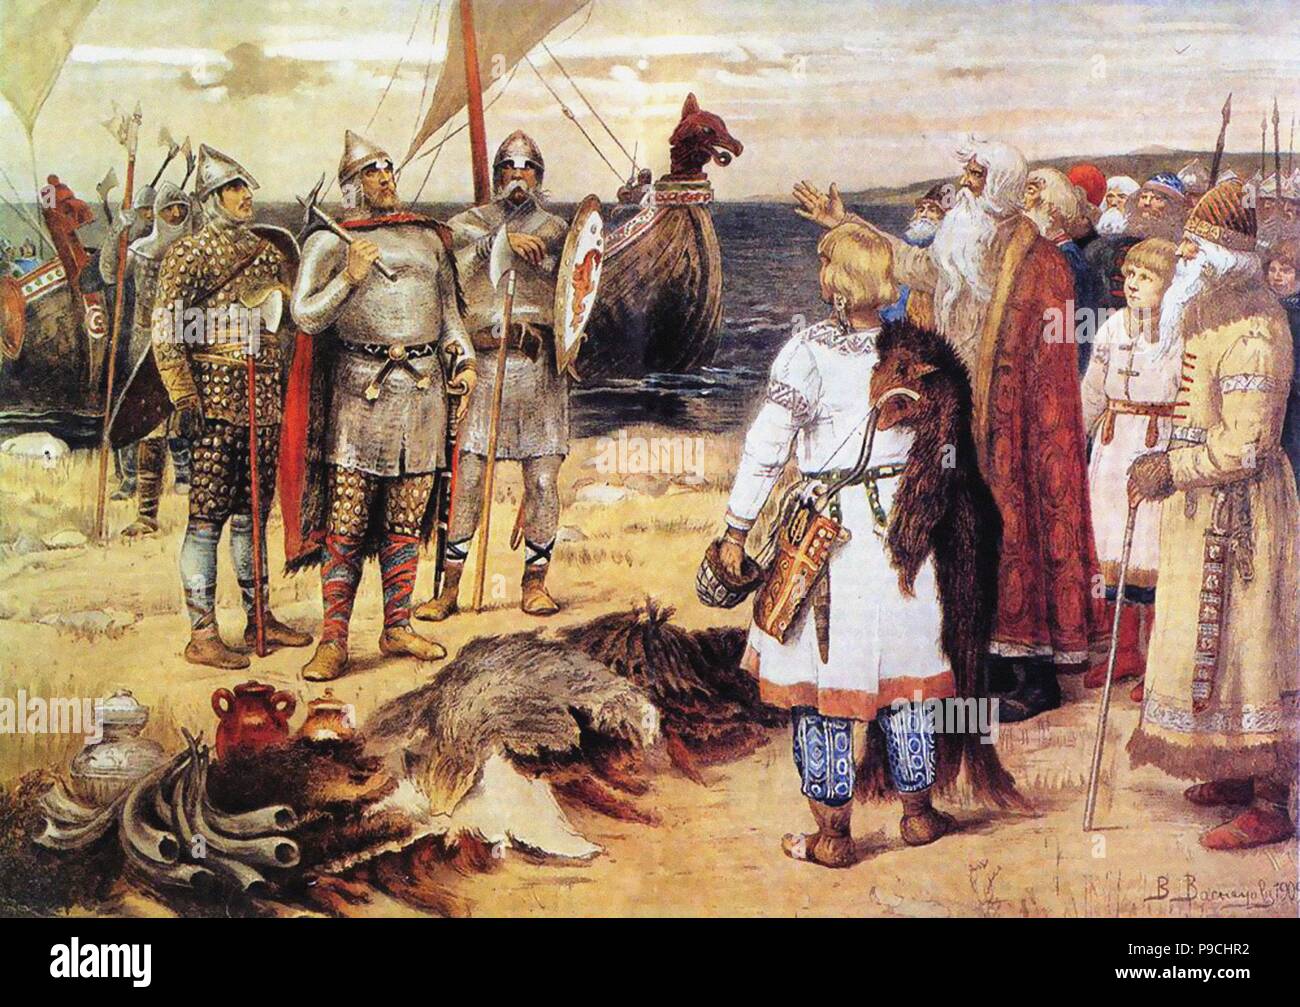 The Invitation of the Varangians: Rurik and his brothers arrive in Staraya Ladoga. Museum: PRIVATE COLLECTION. Stock Photo